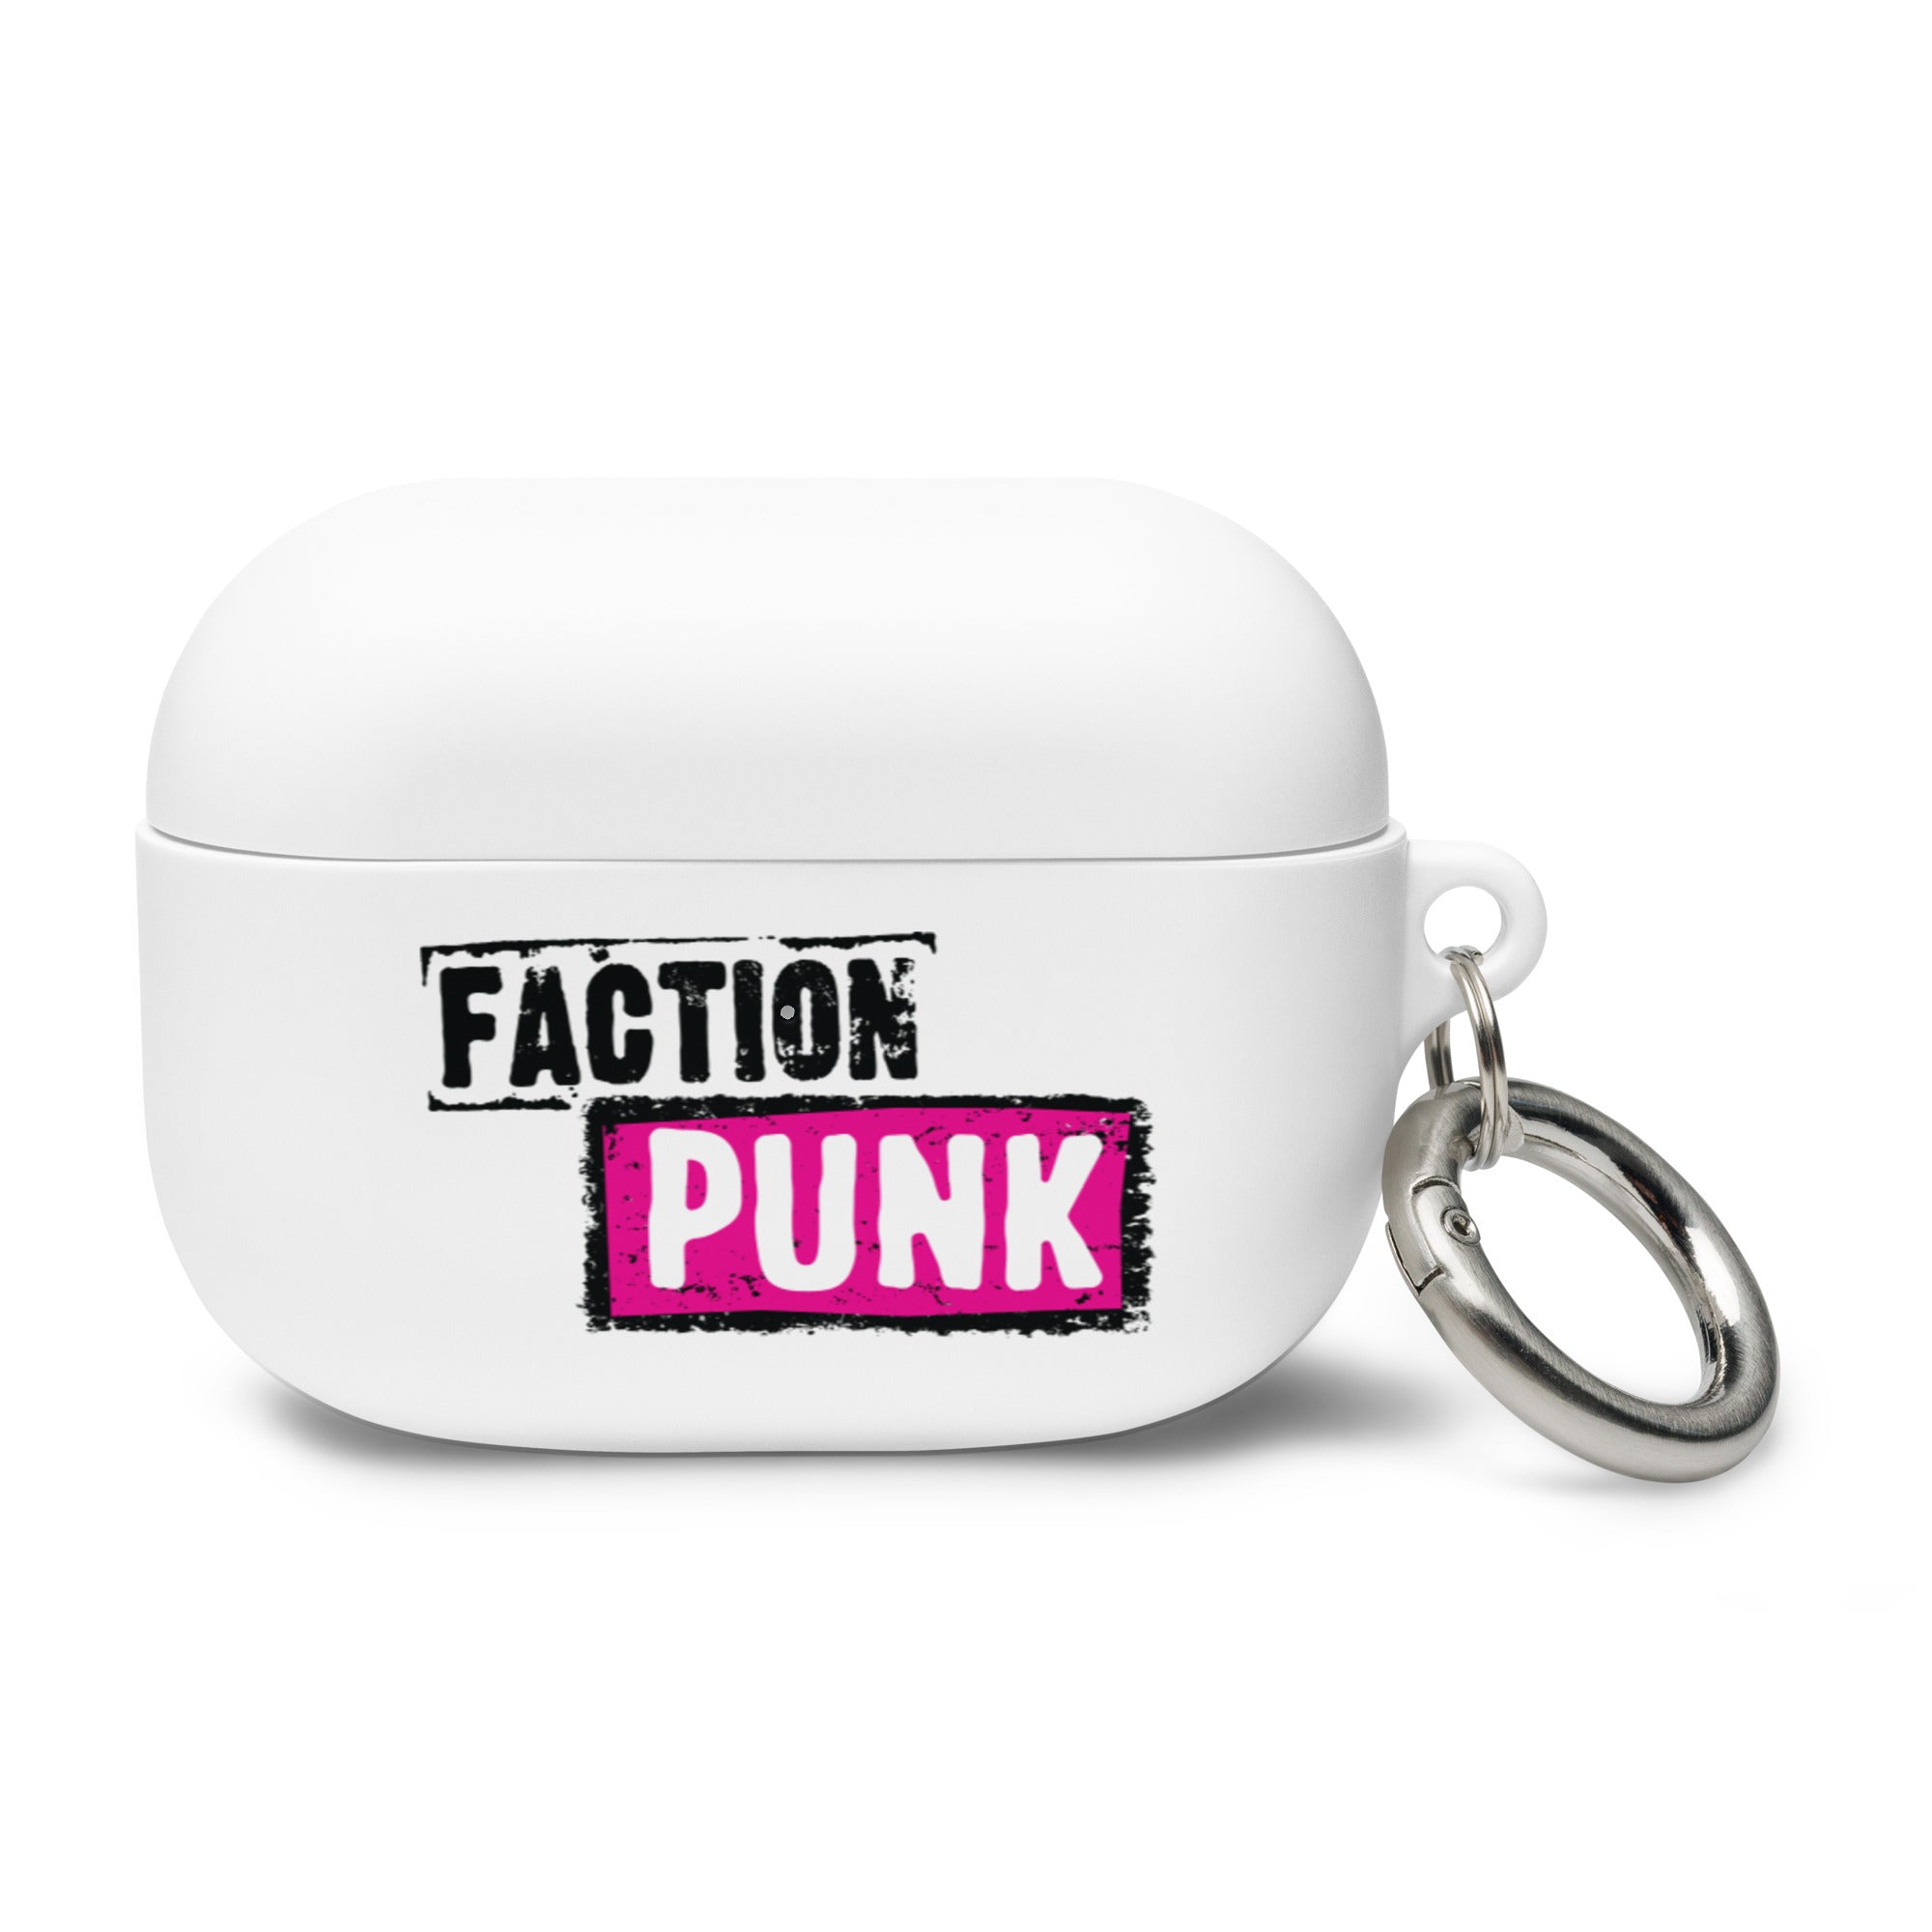 Faction Punk: AirPods® Case Cover